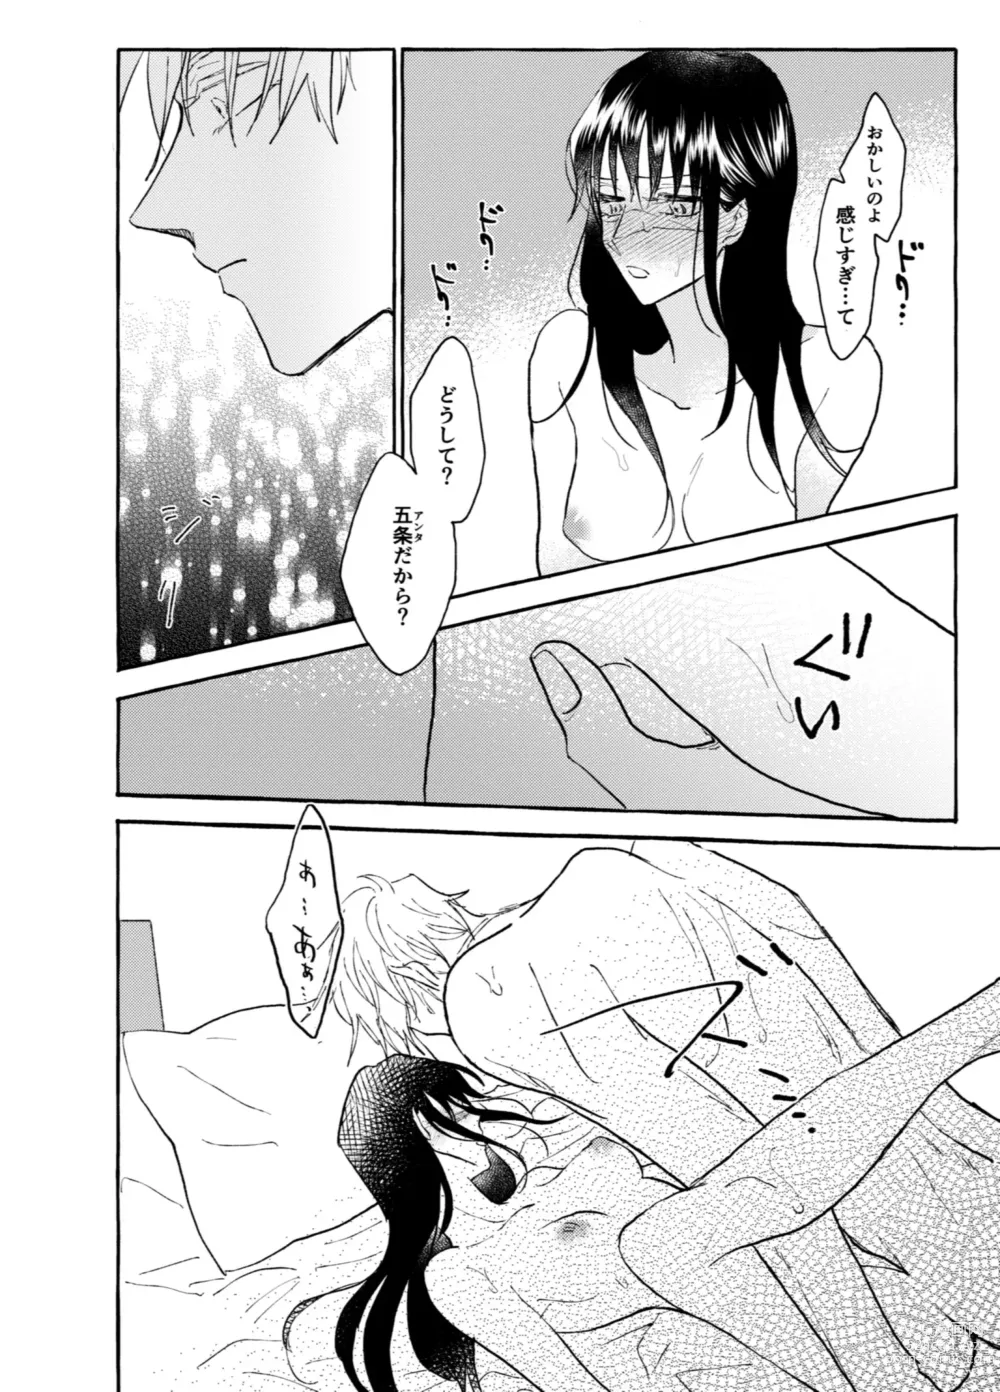 Page 15 of doujinshi One of These Nights